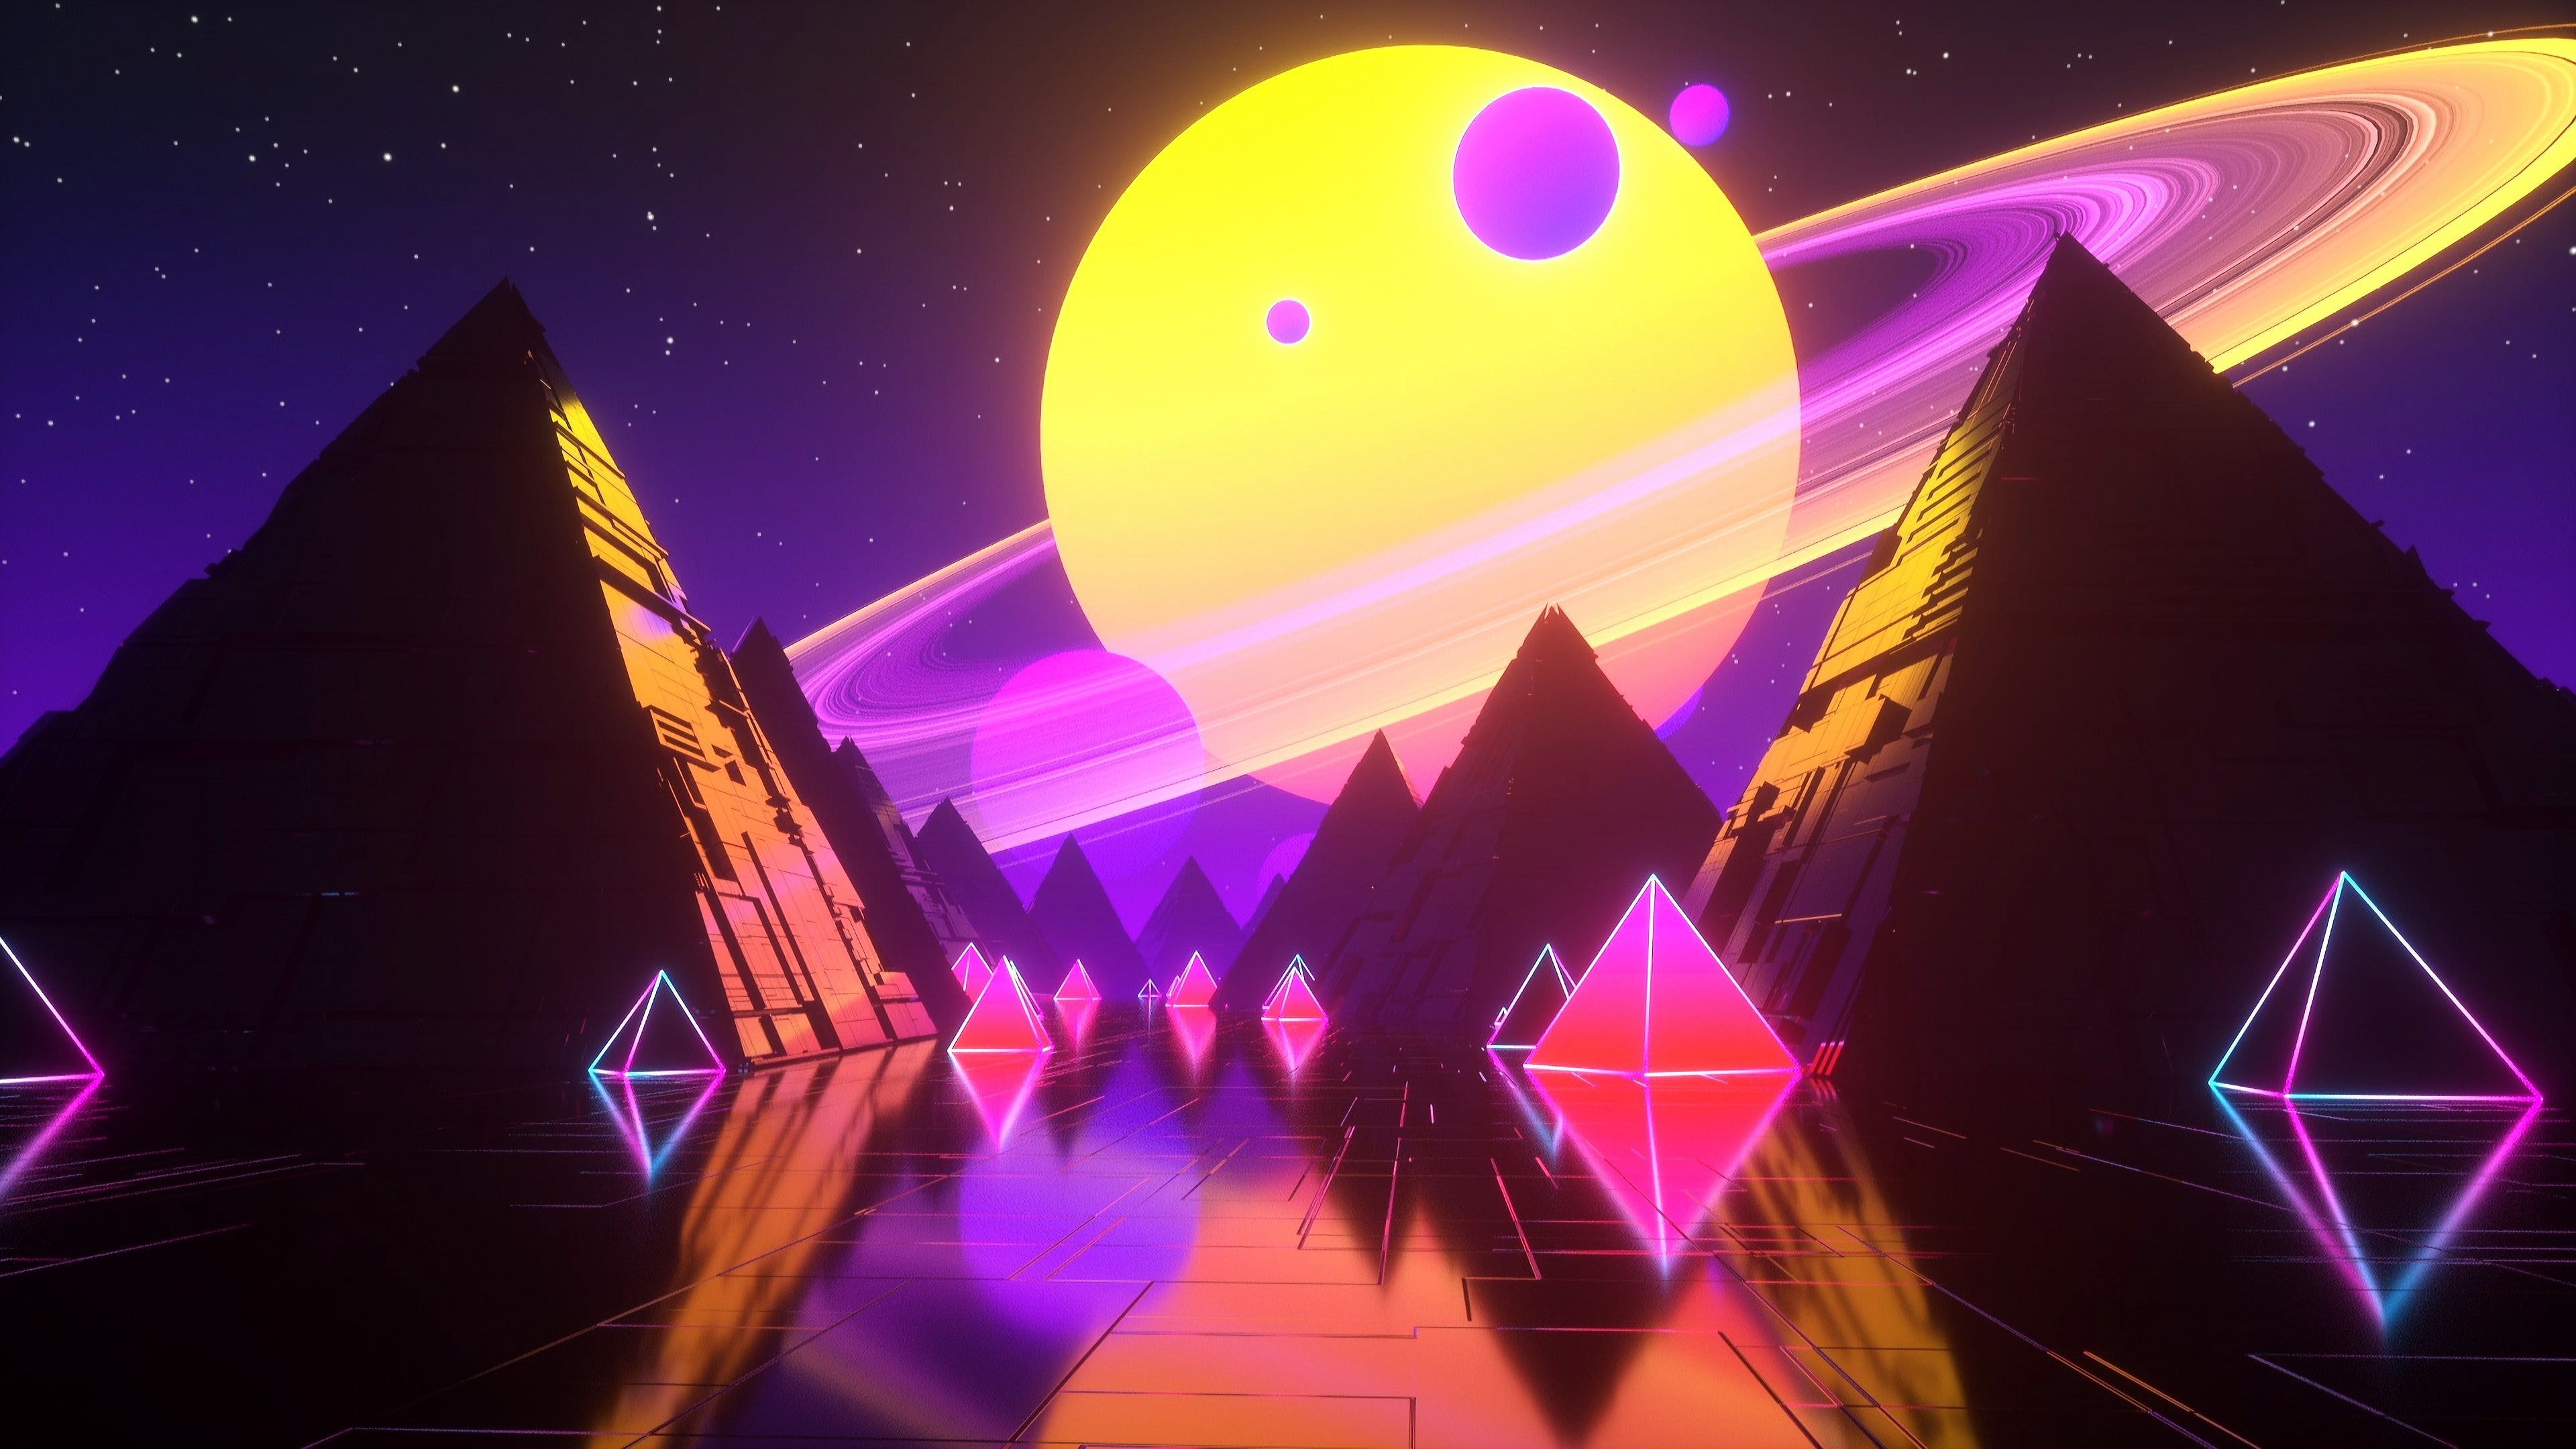 Music #Stars #Planet #Space #Pyramid #Pyramid #Background #Neon #Synth #Retrowave #Synthwave New Retro. New retro wave, Papel de parede retro, Papel de parede pc